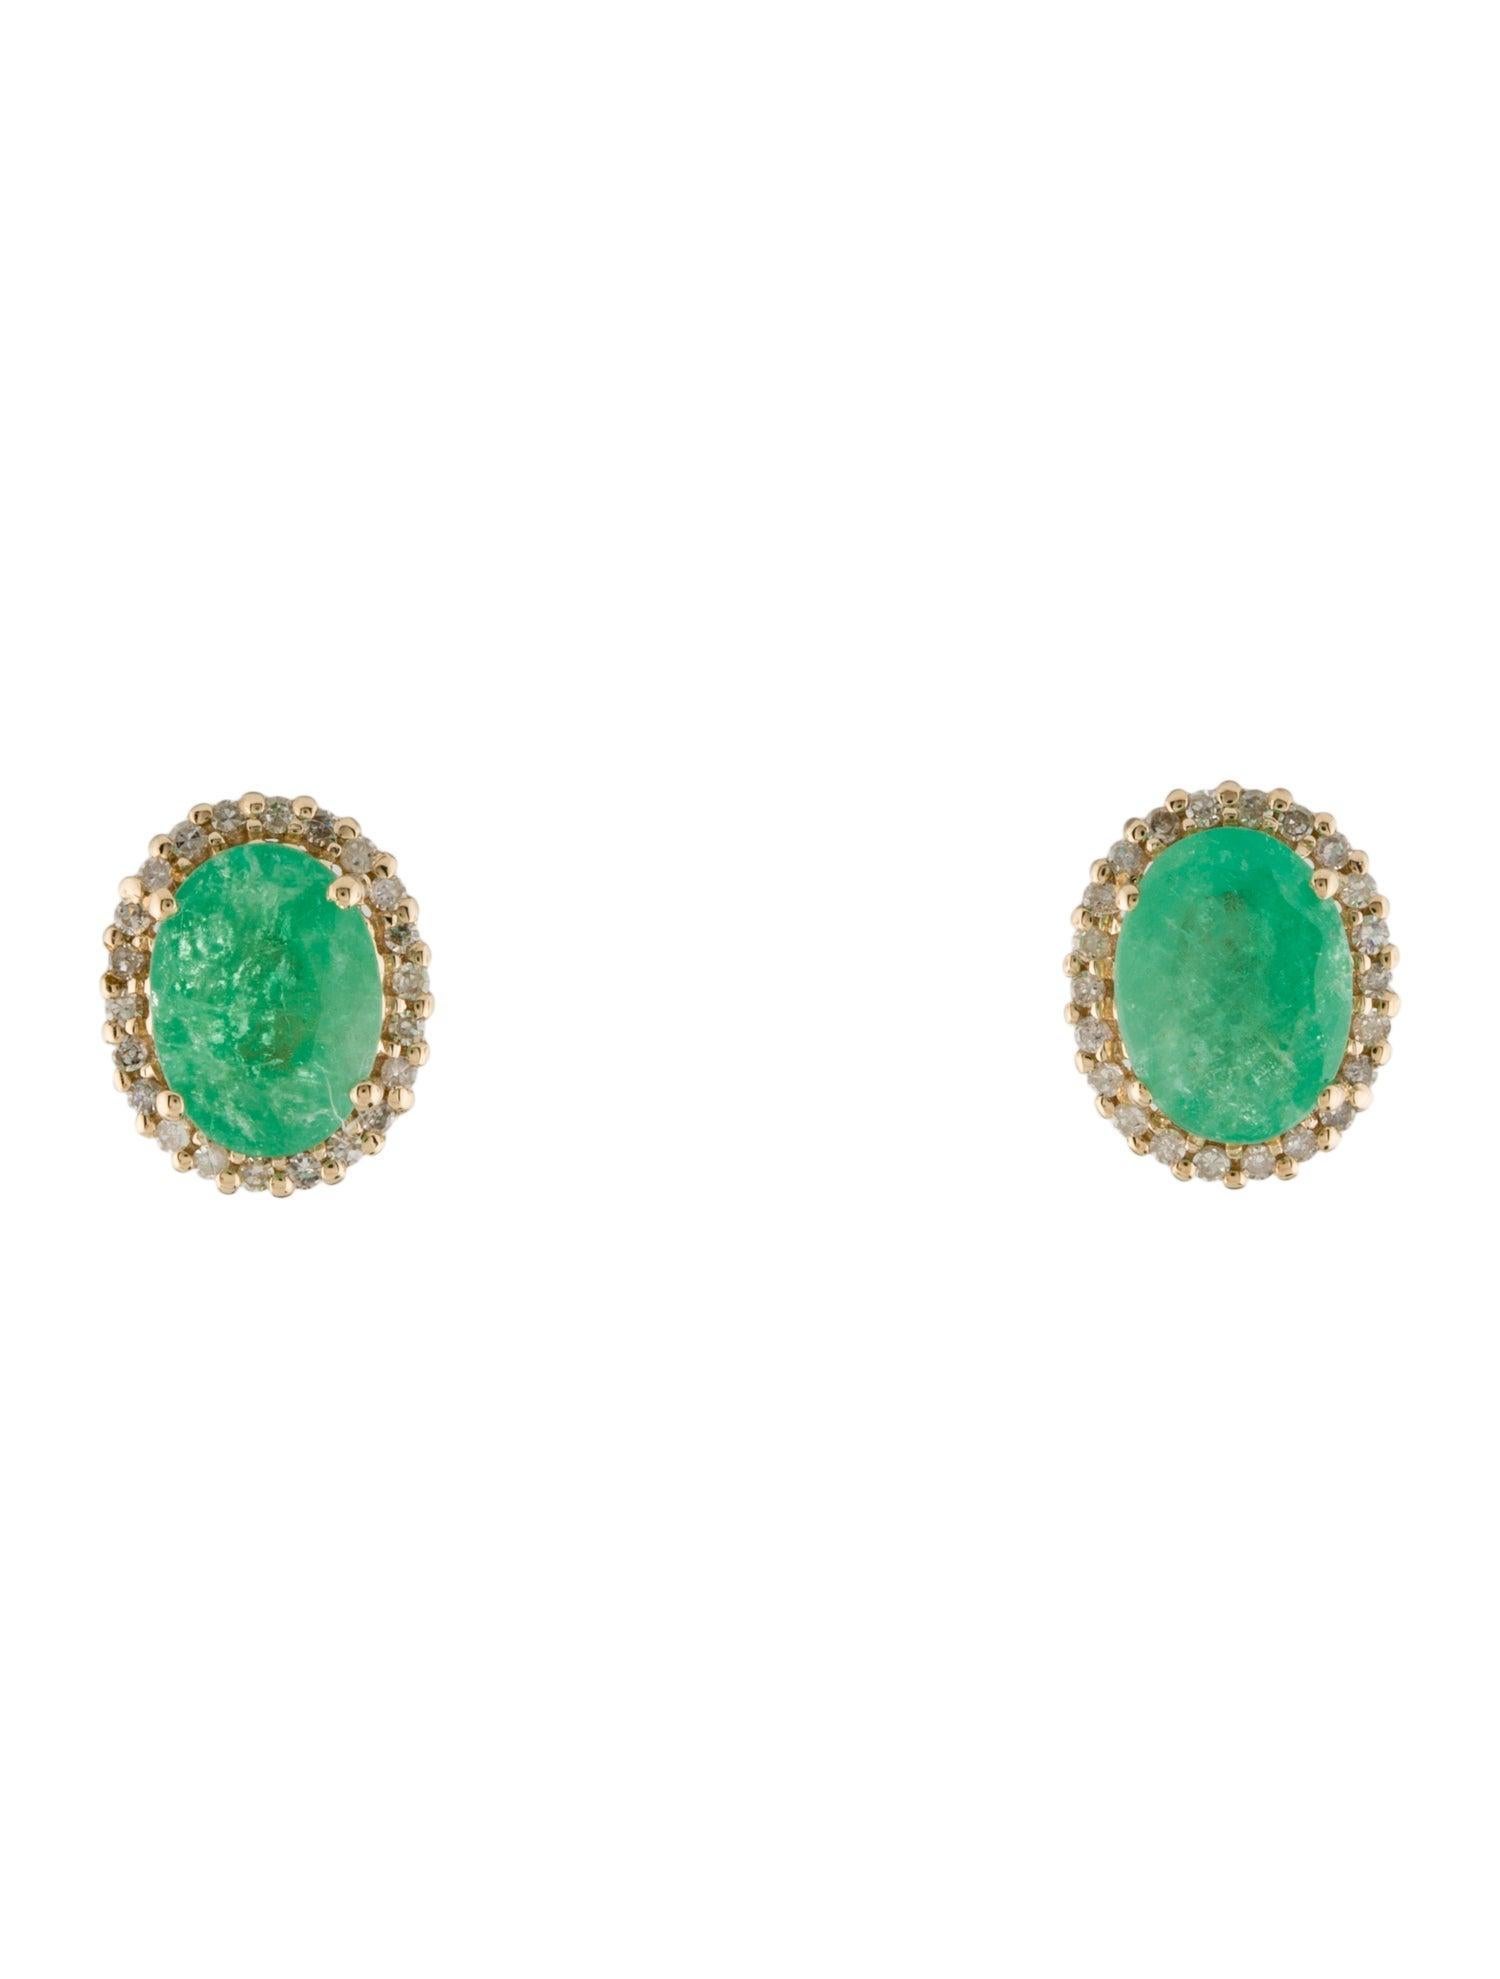 Introducing our exquisite 14K Yellow Gold Stud Earrings, featuring the luxurious blend of oval modified brilliant emeralds complemented by dazzling near colorless diamonds. These earrings showcase the timeless beauty of emeralds, set against the